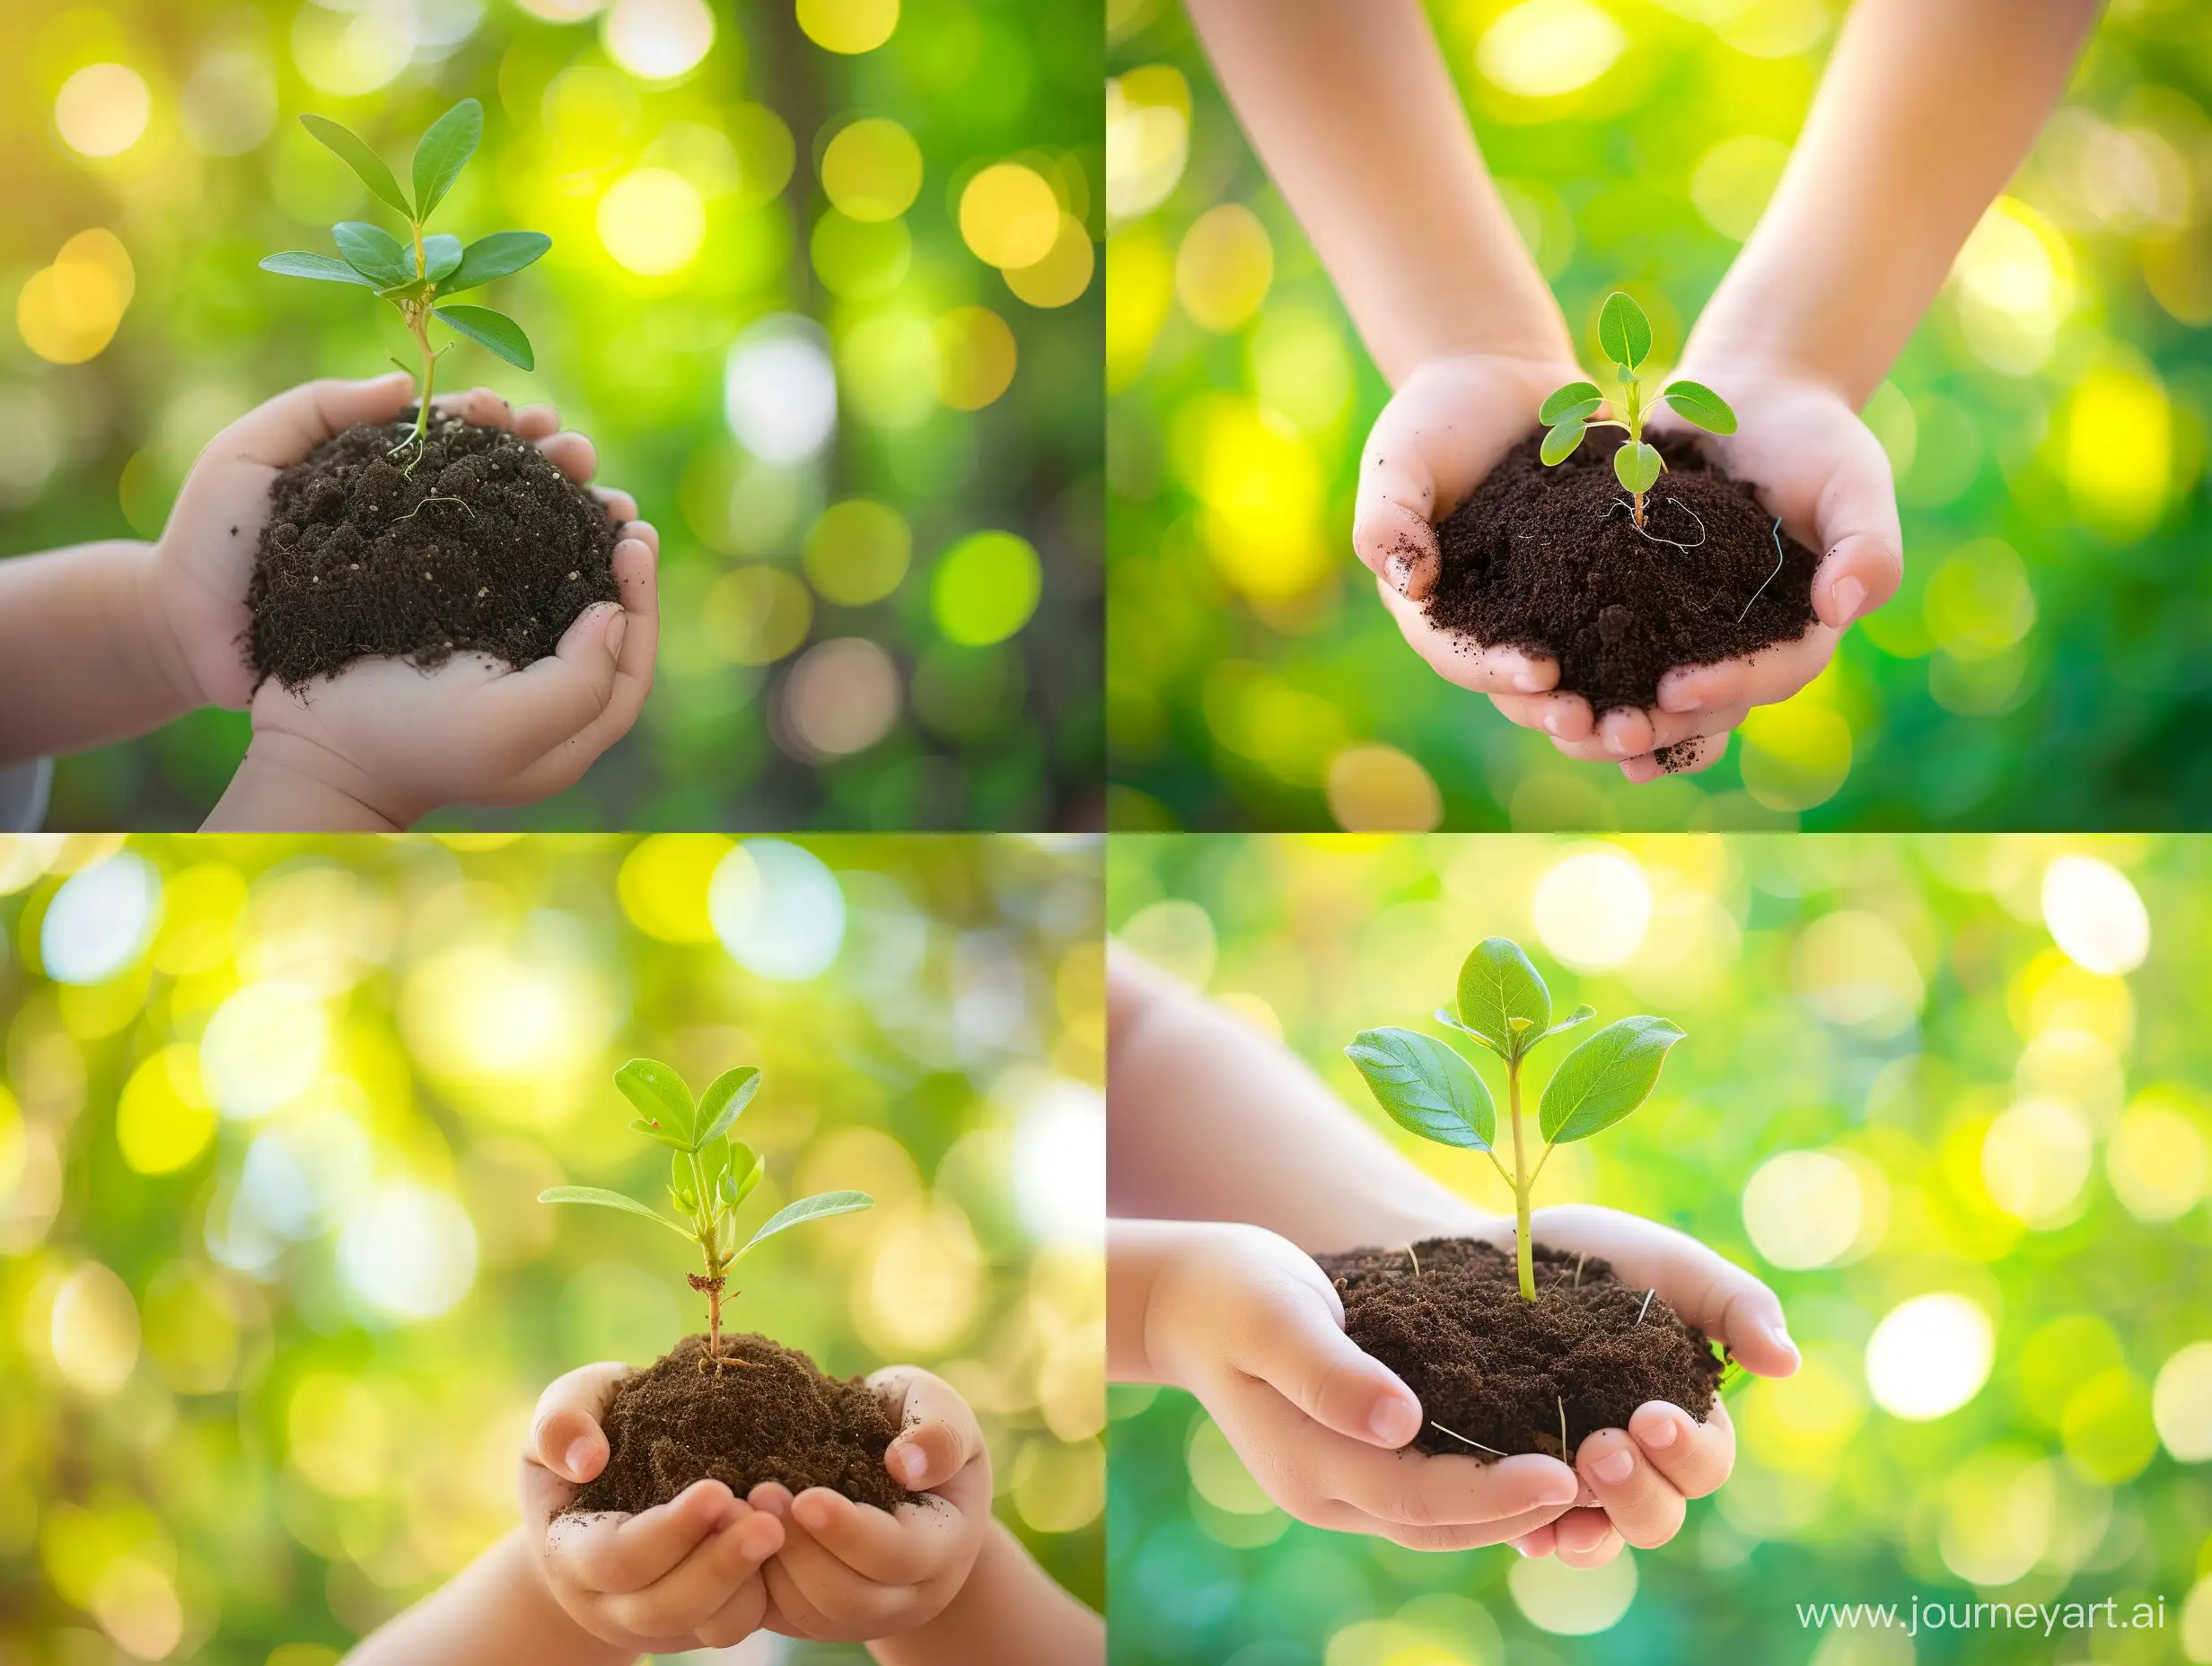 Child-Holding-Sprouting-Seedling-Against-Green-and-Yellow-Bokeh